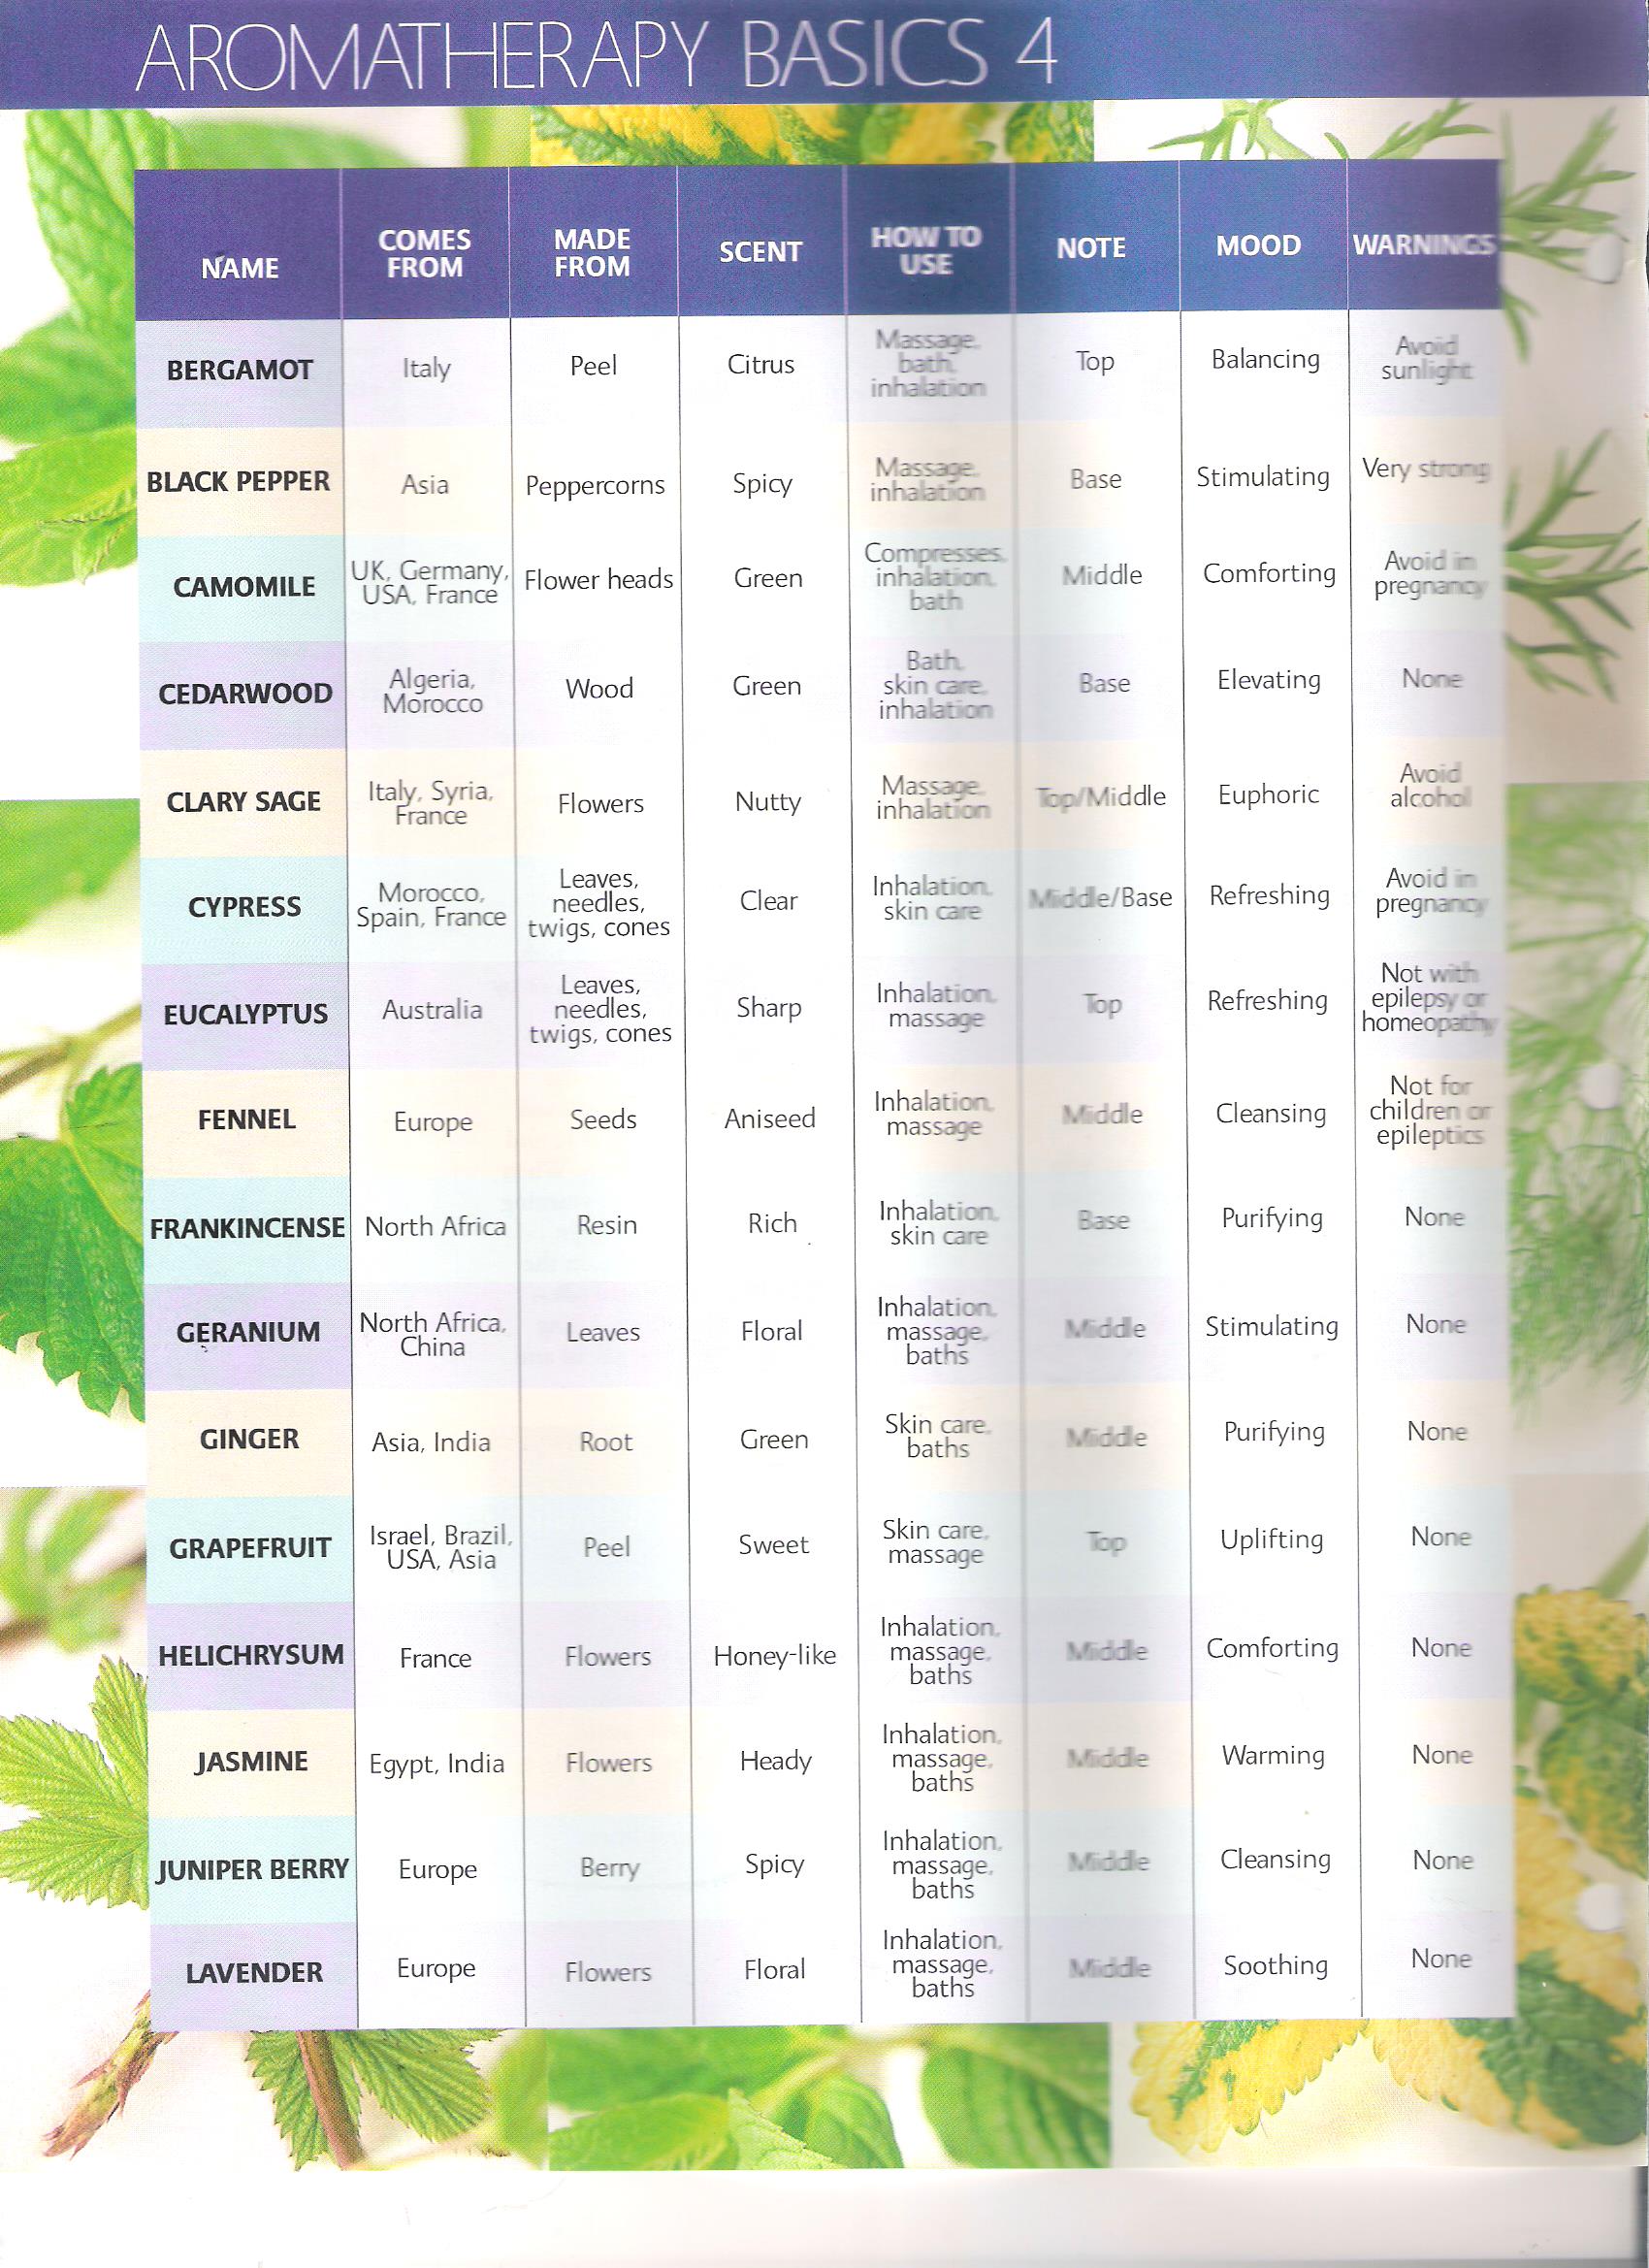 What are some good aromatherapy reference charts?